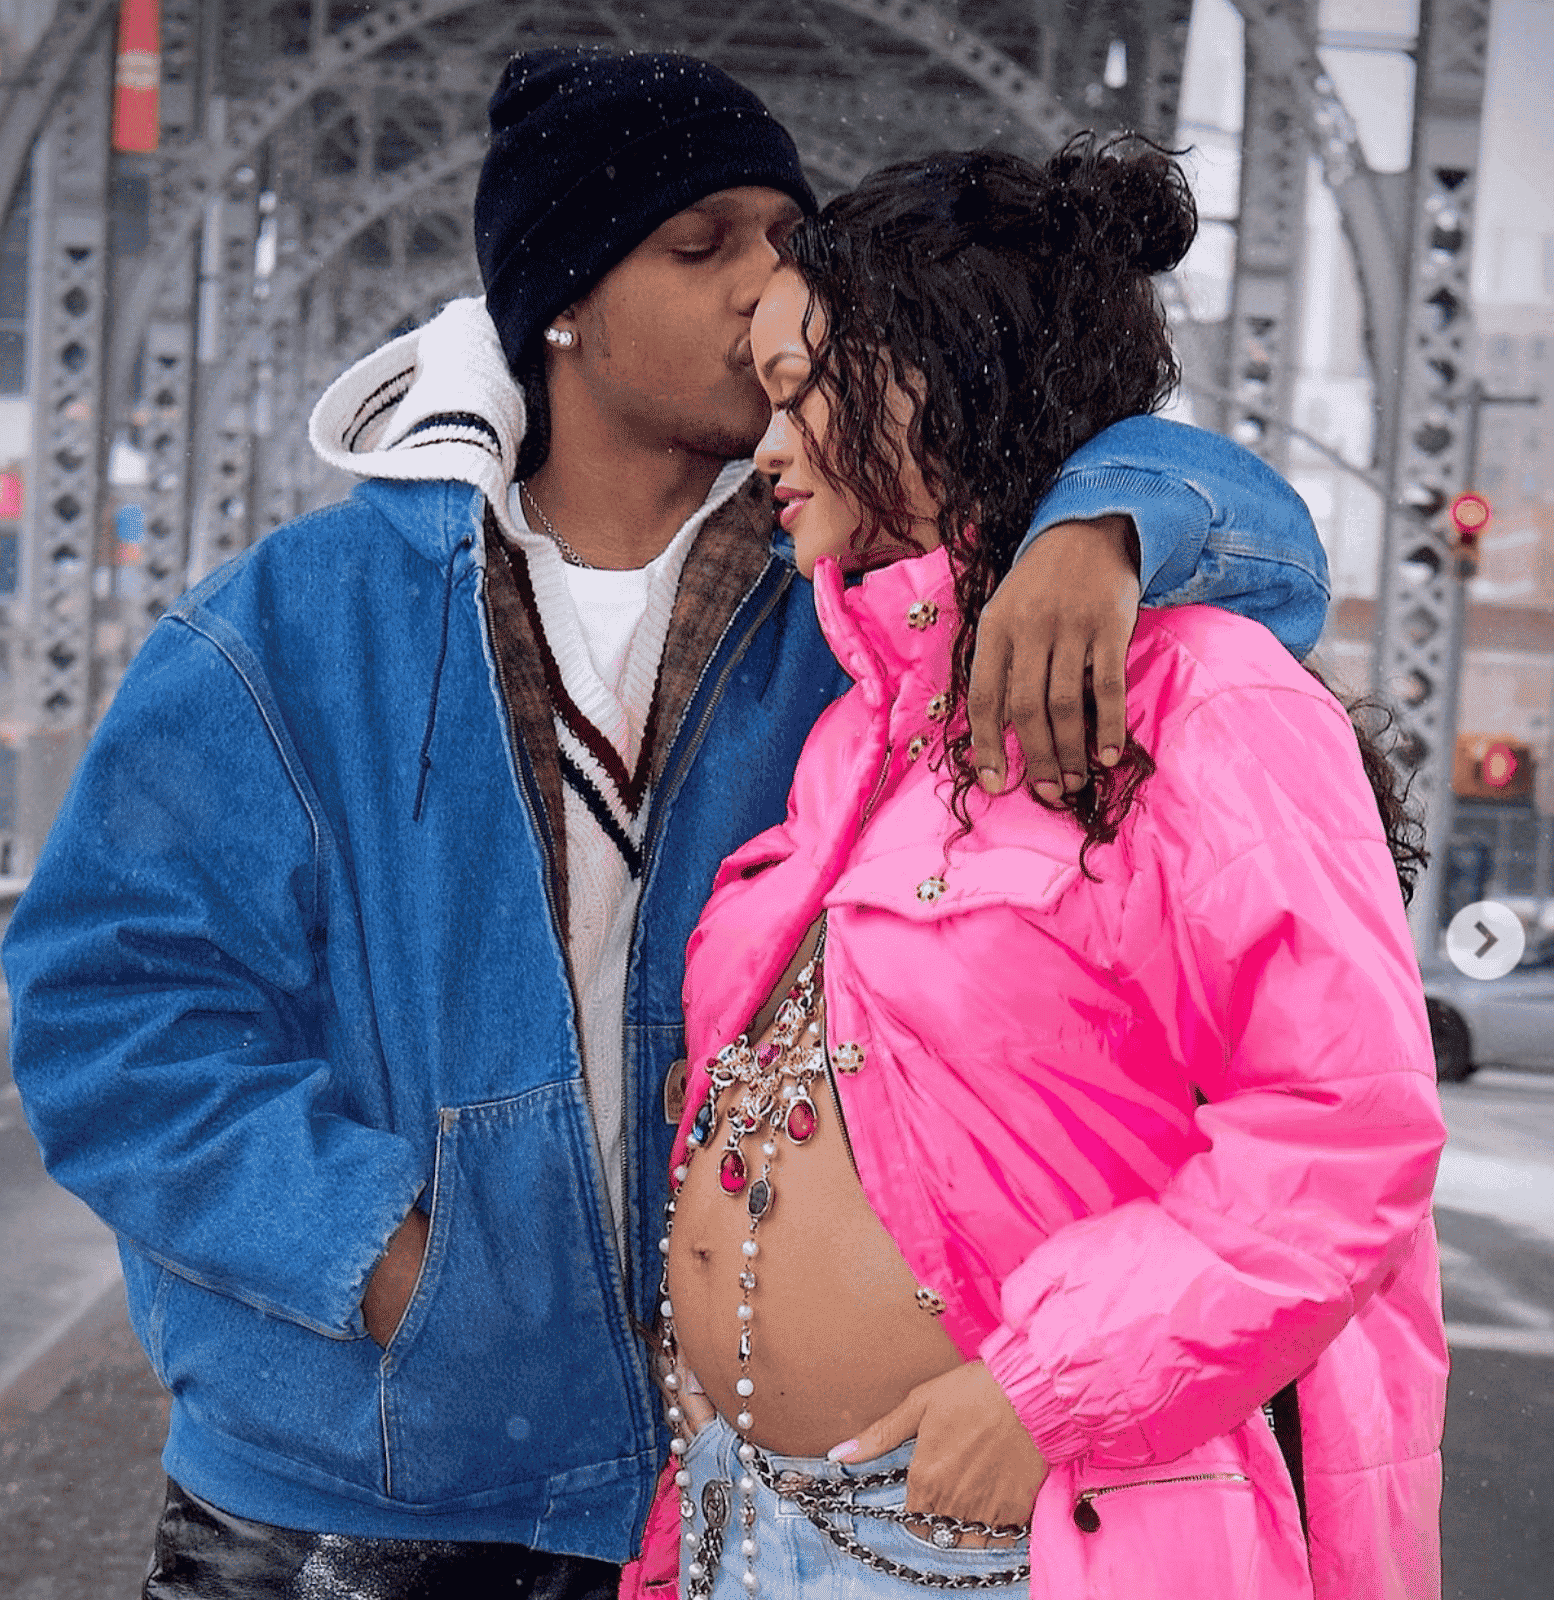 featured image for post: Rihanna Reveals Her Pregnancy in This ’90s Pink Chanel Puffer Coat